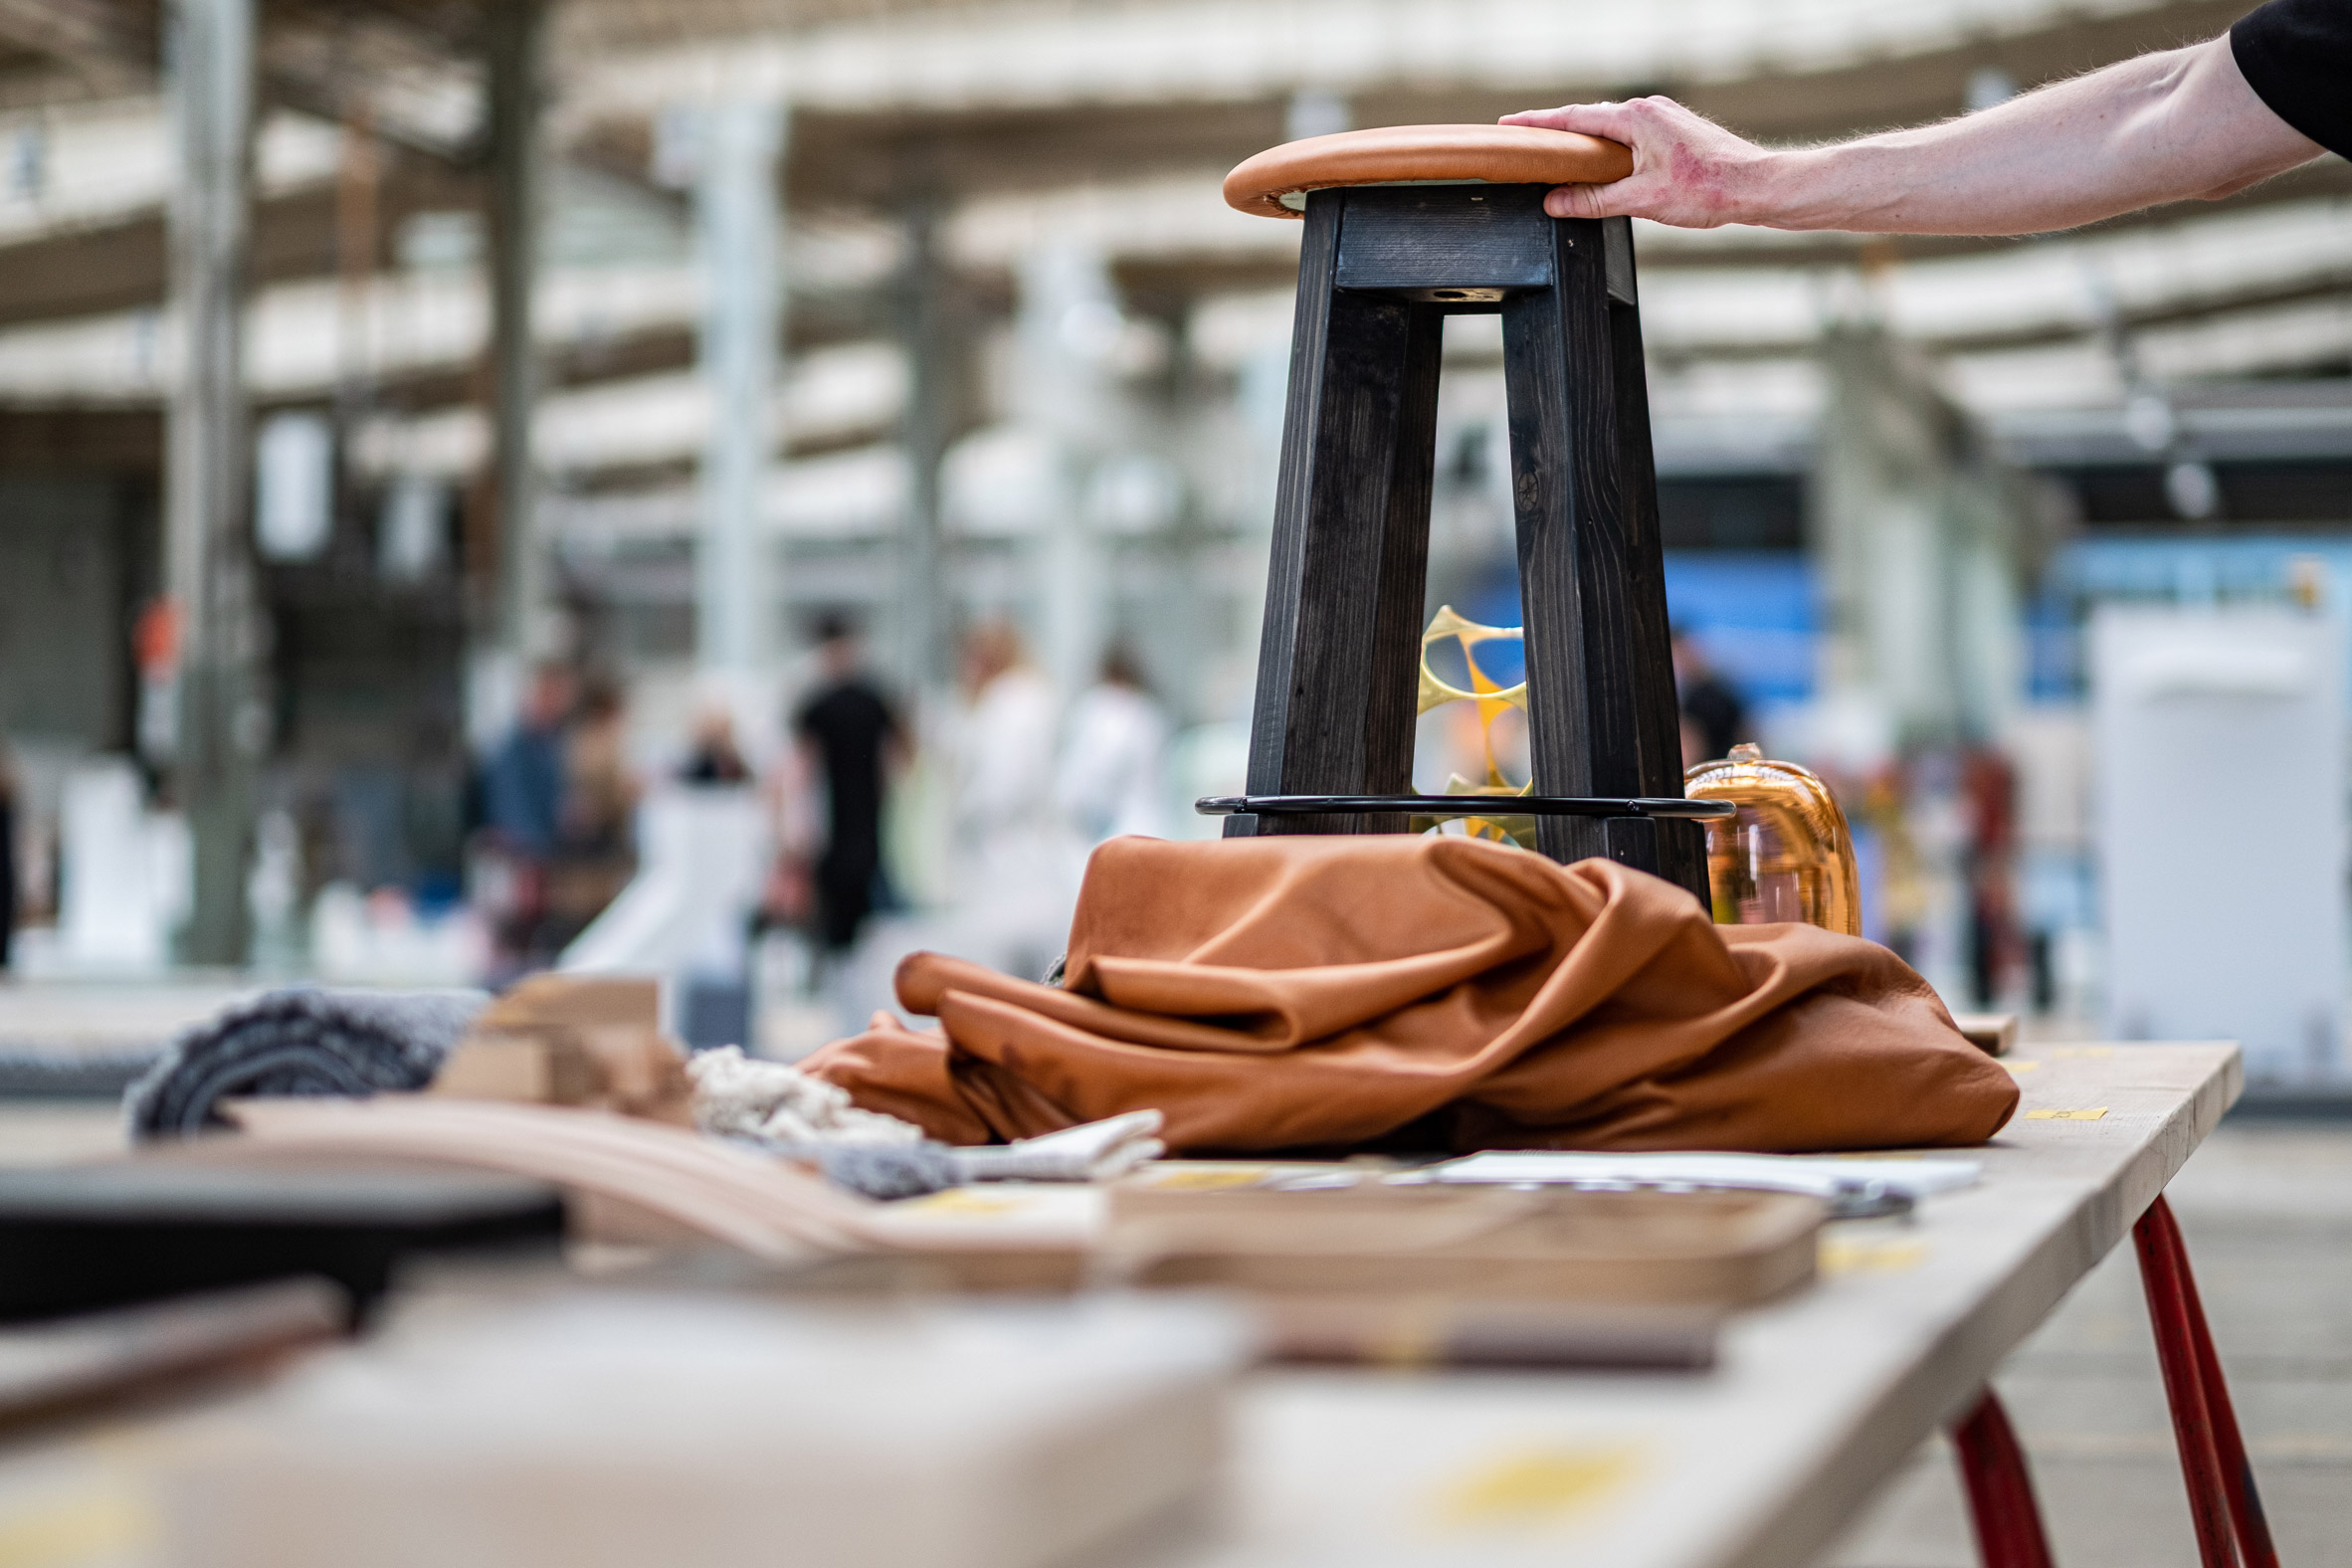 Stool on show at Southern Sweden Design Days